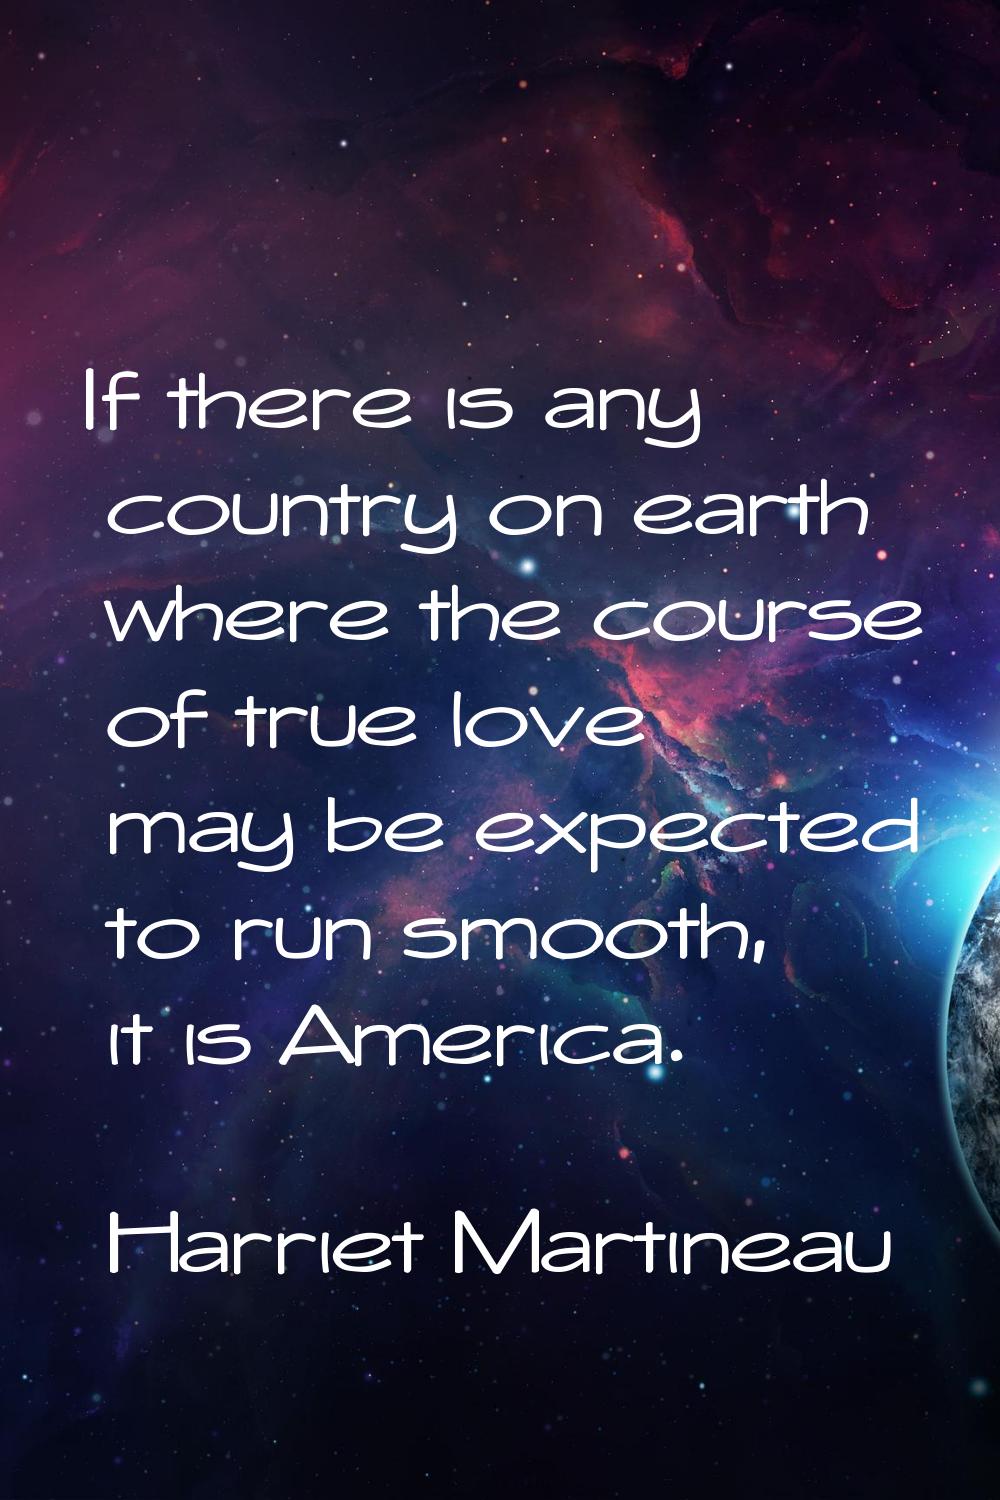 If there is any country on earth where the course of true love may be expected to run smooth, it is